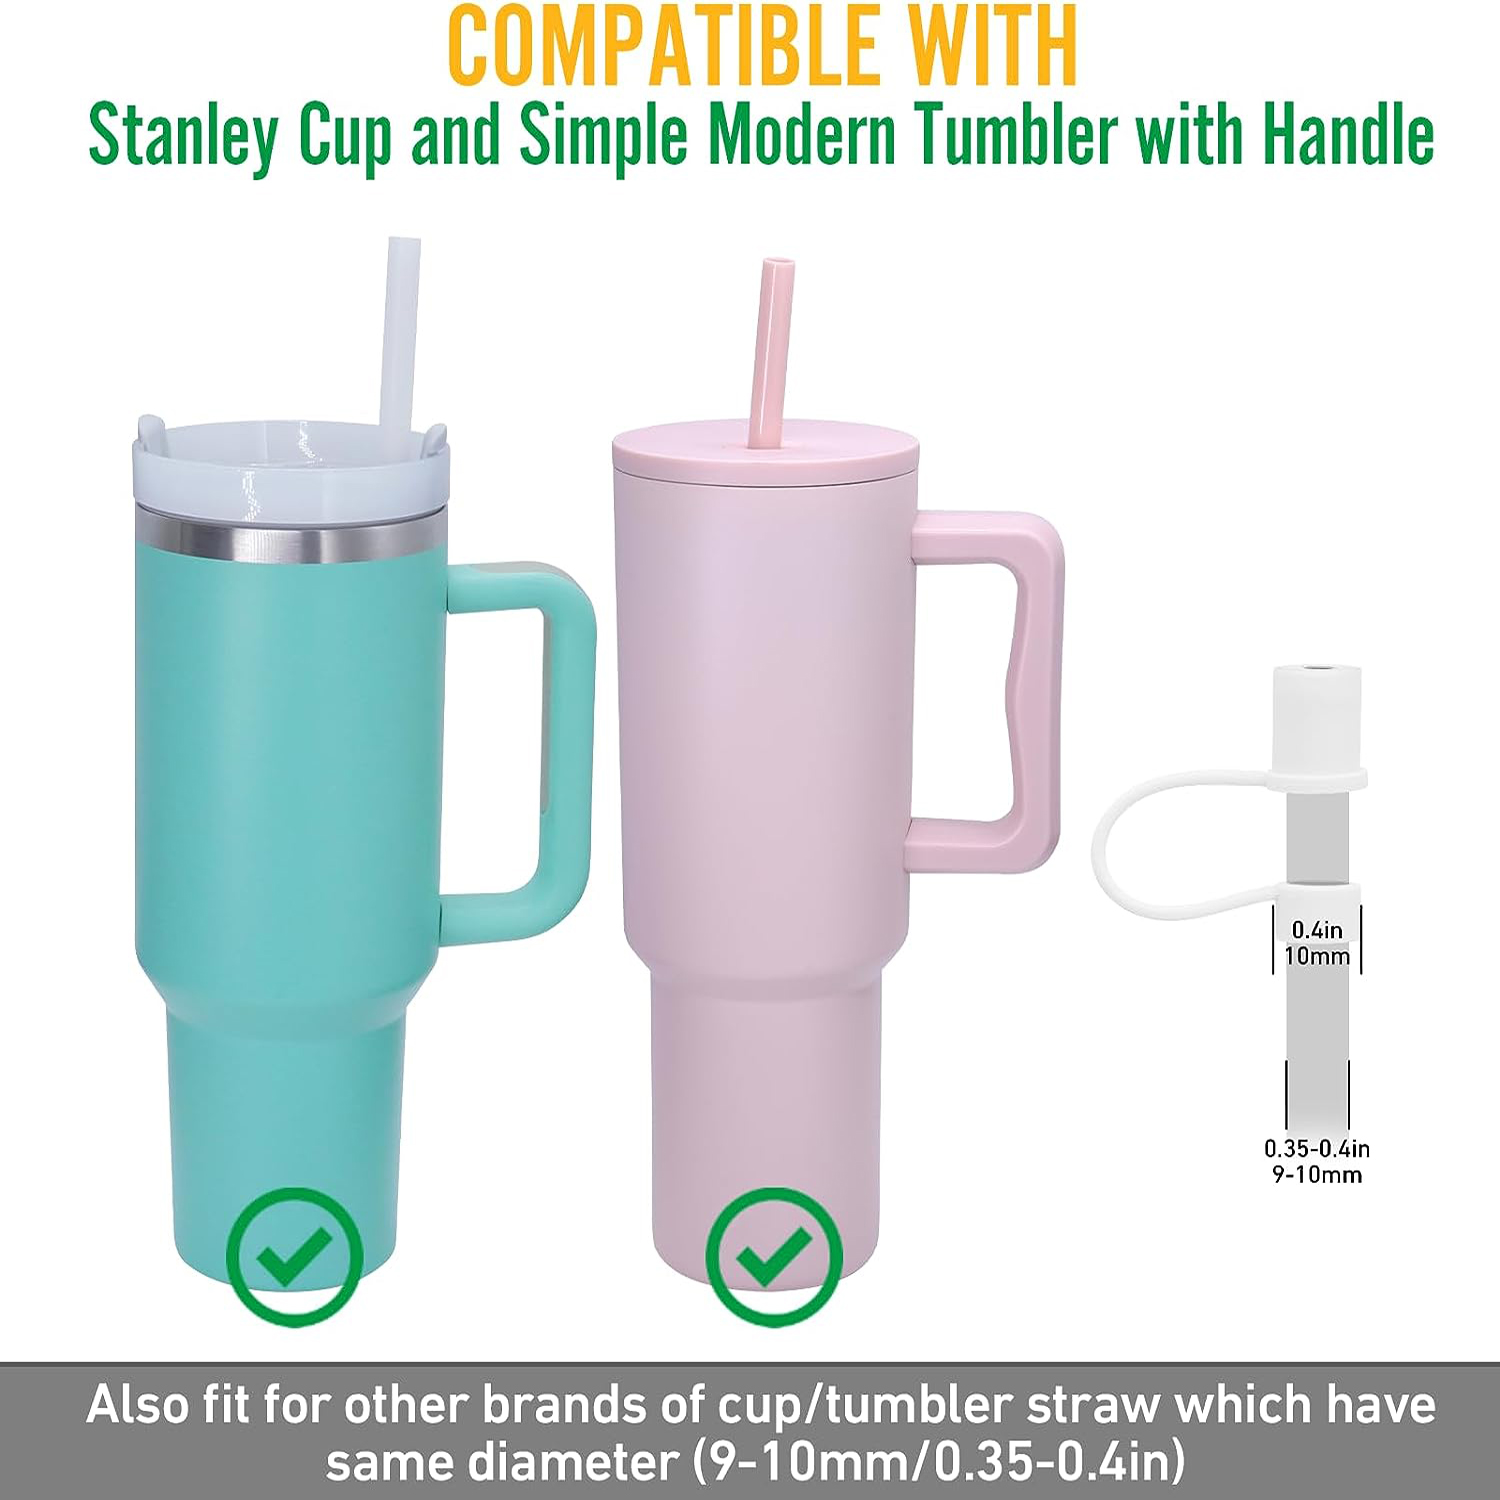 Cheap Straw Cover Cap For Stanley Cup Silicone Straw Topper Fit Stanley Oz  Tumbler With Handle 10Mm Drinking Straw Tip Covers